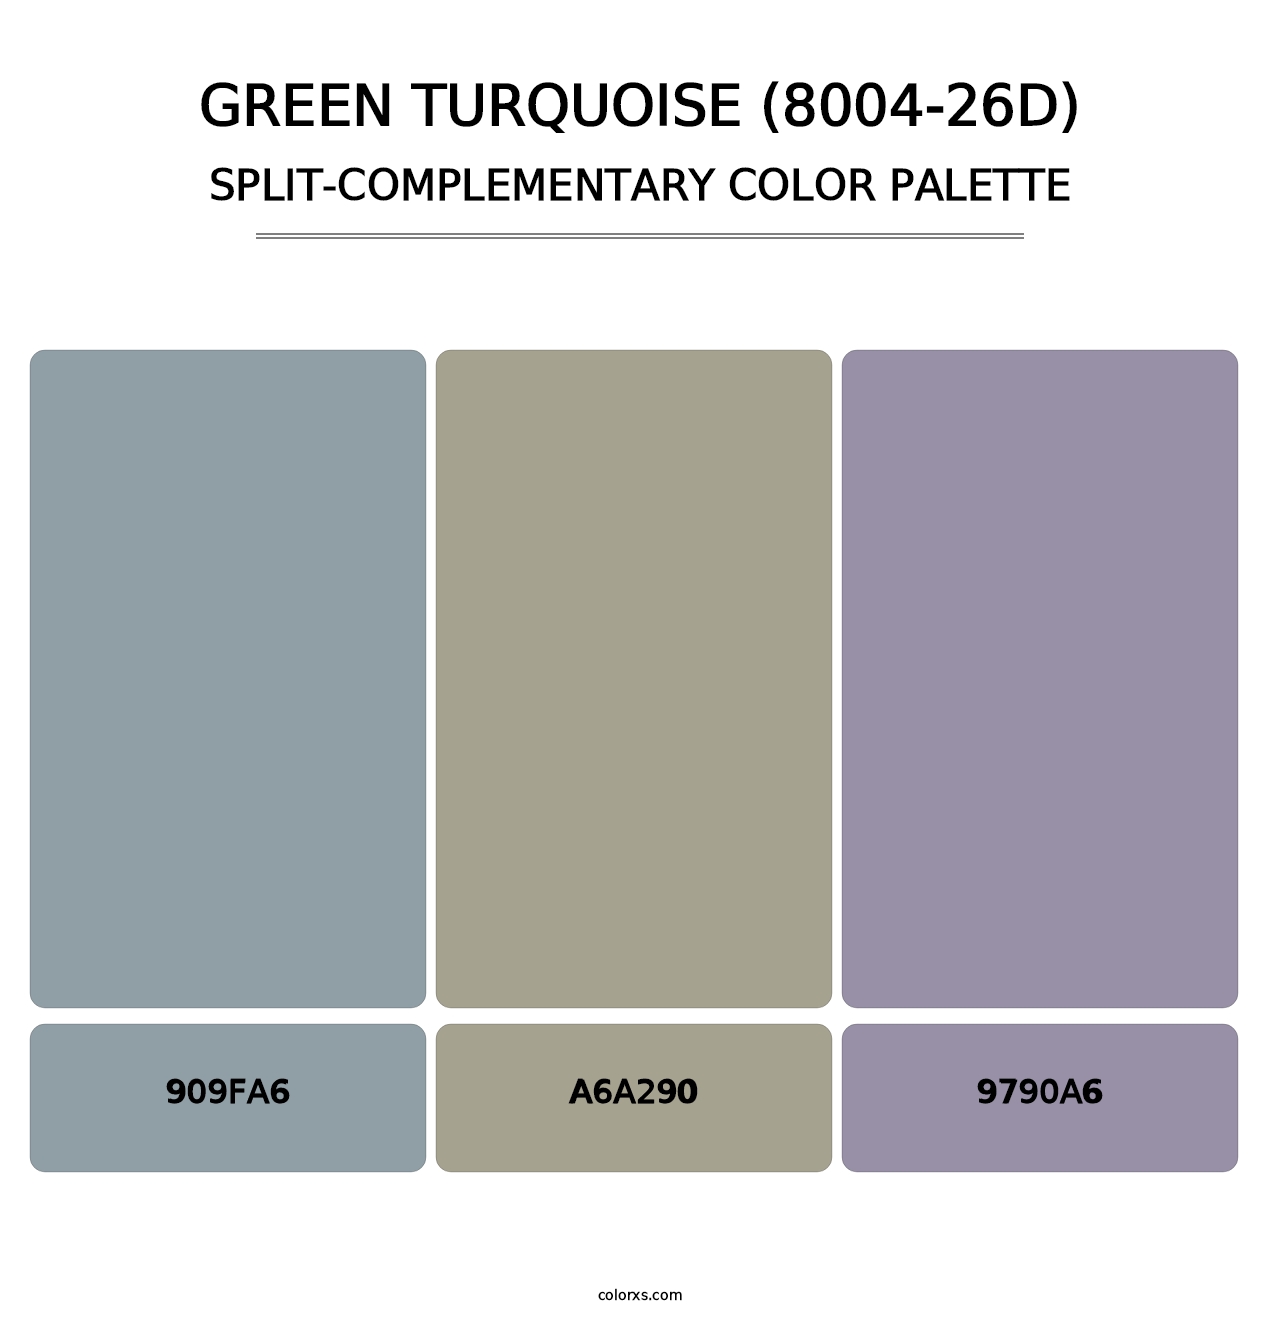 Green Turquoise (8004-26D) - Split-Complementary Color Palette